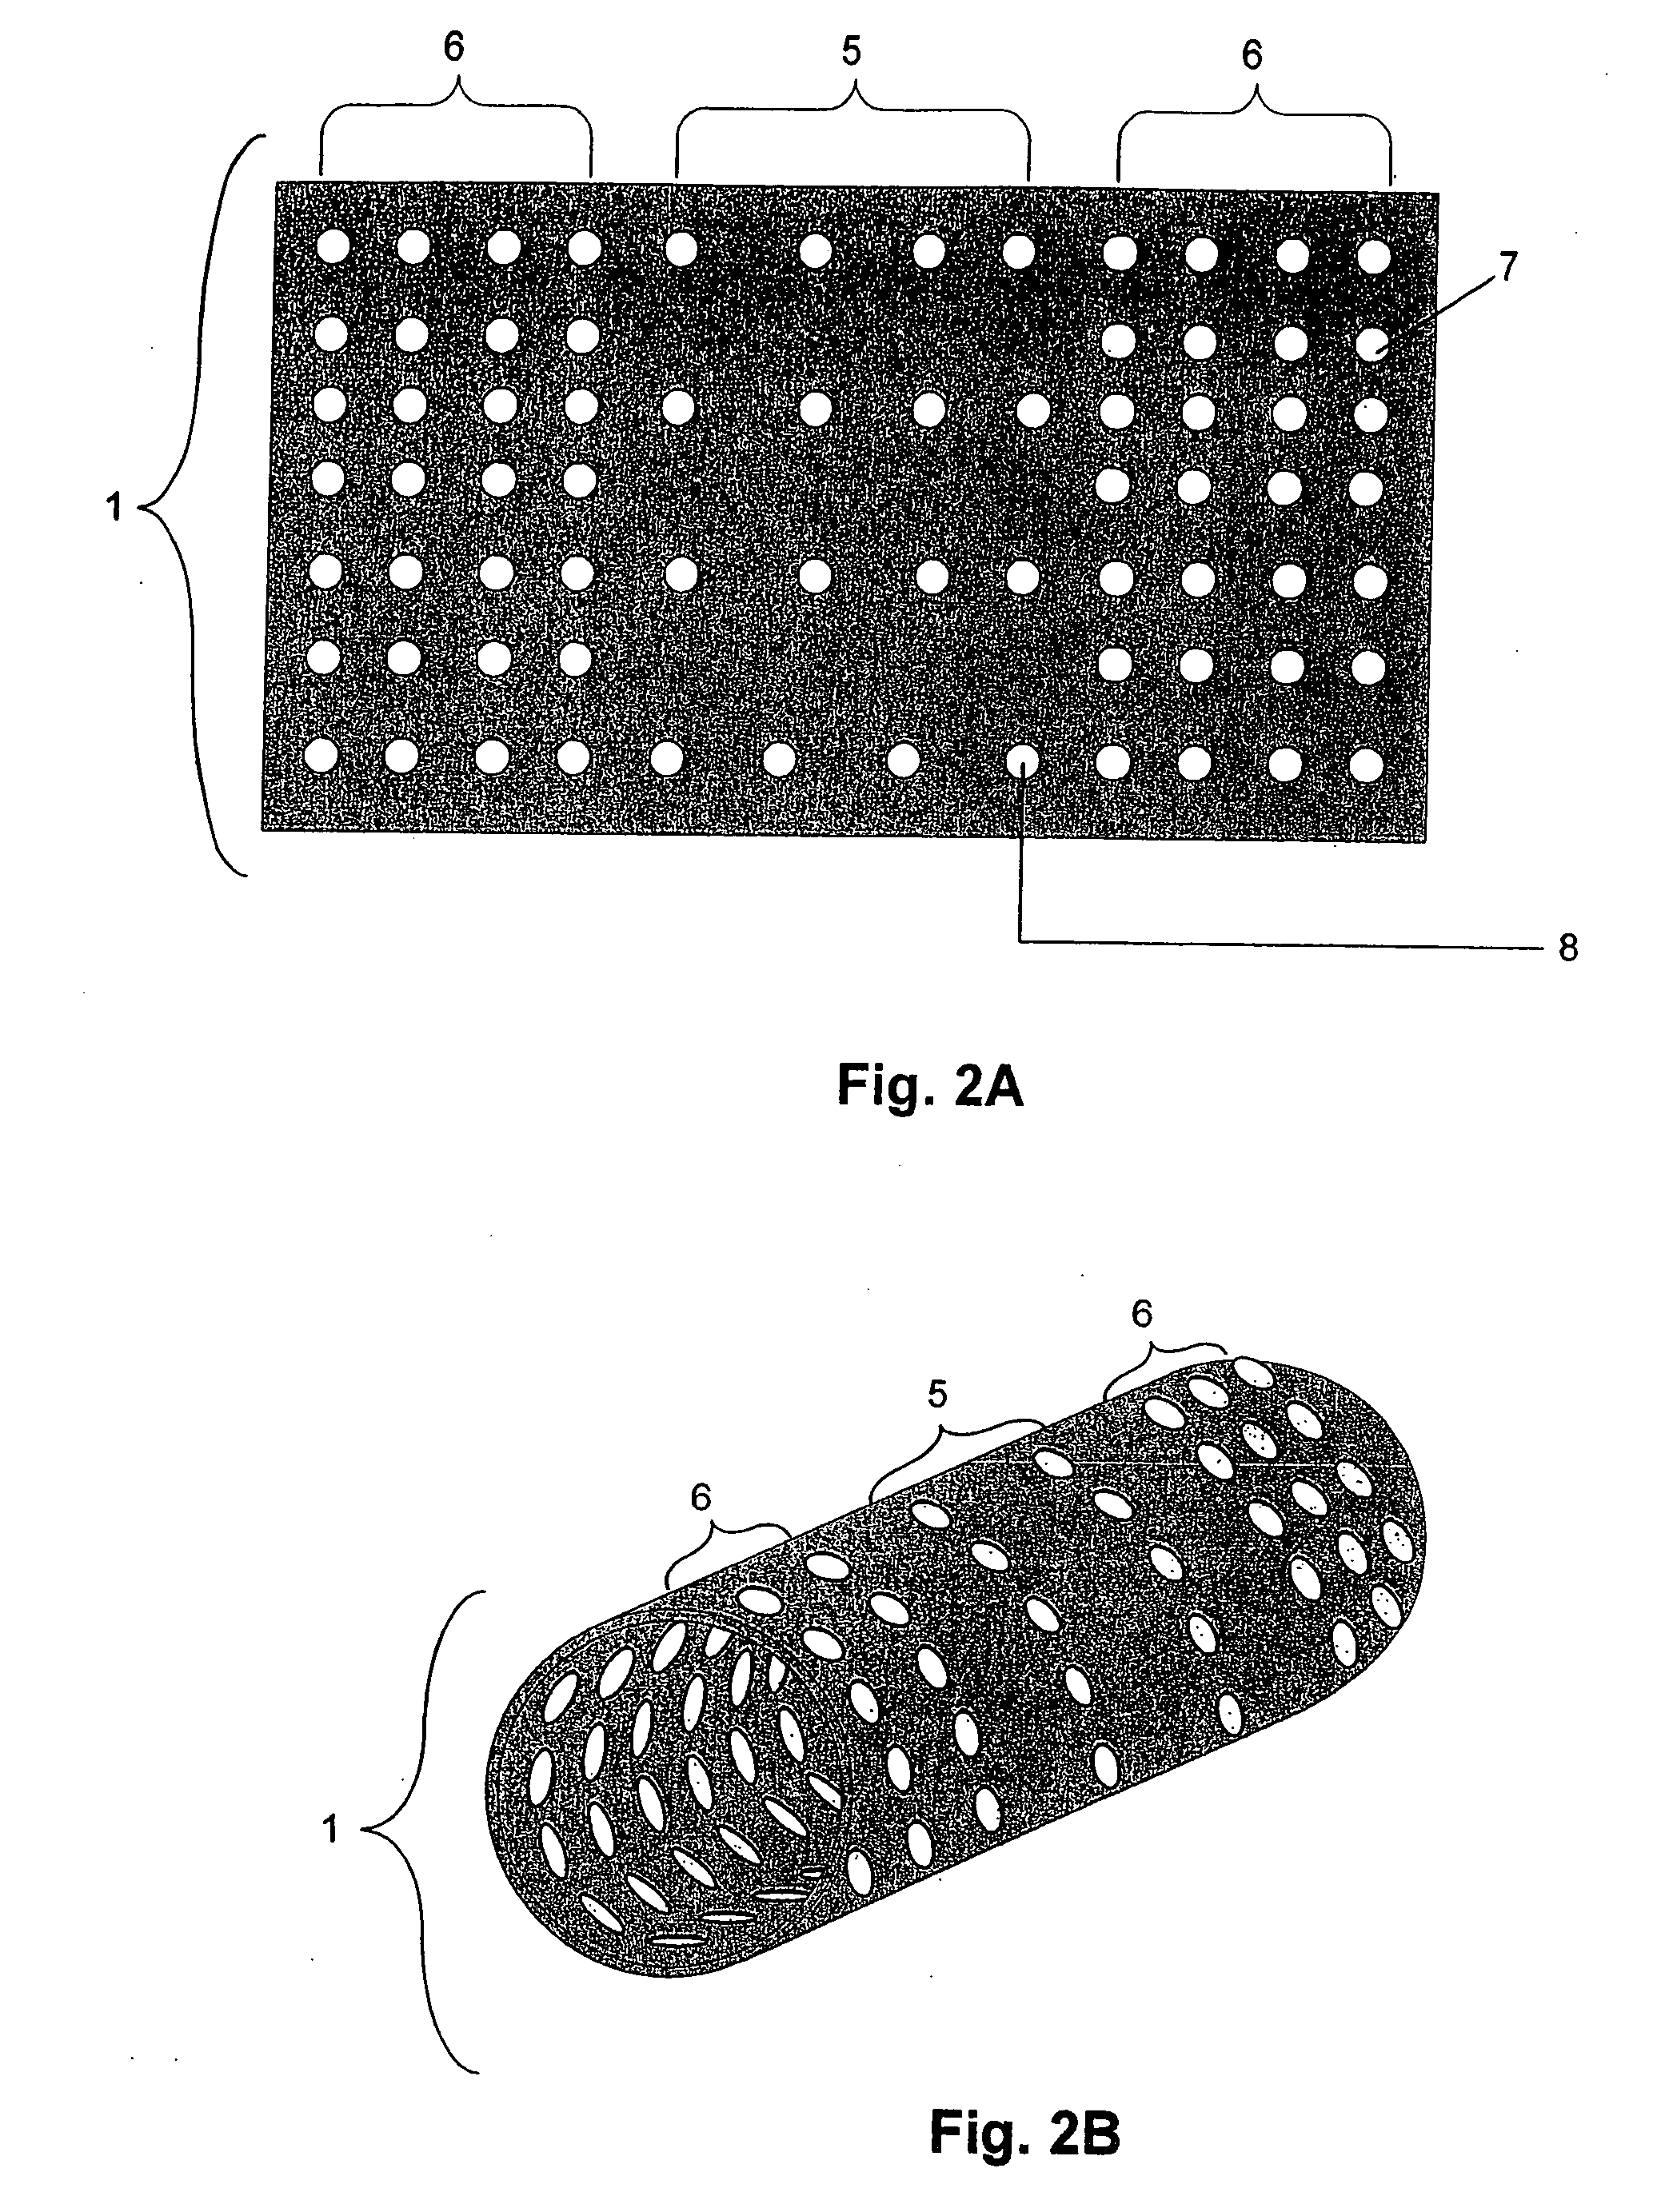 Covering for an endoprosthetic device and methods of using for aneurysm treatment